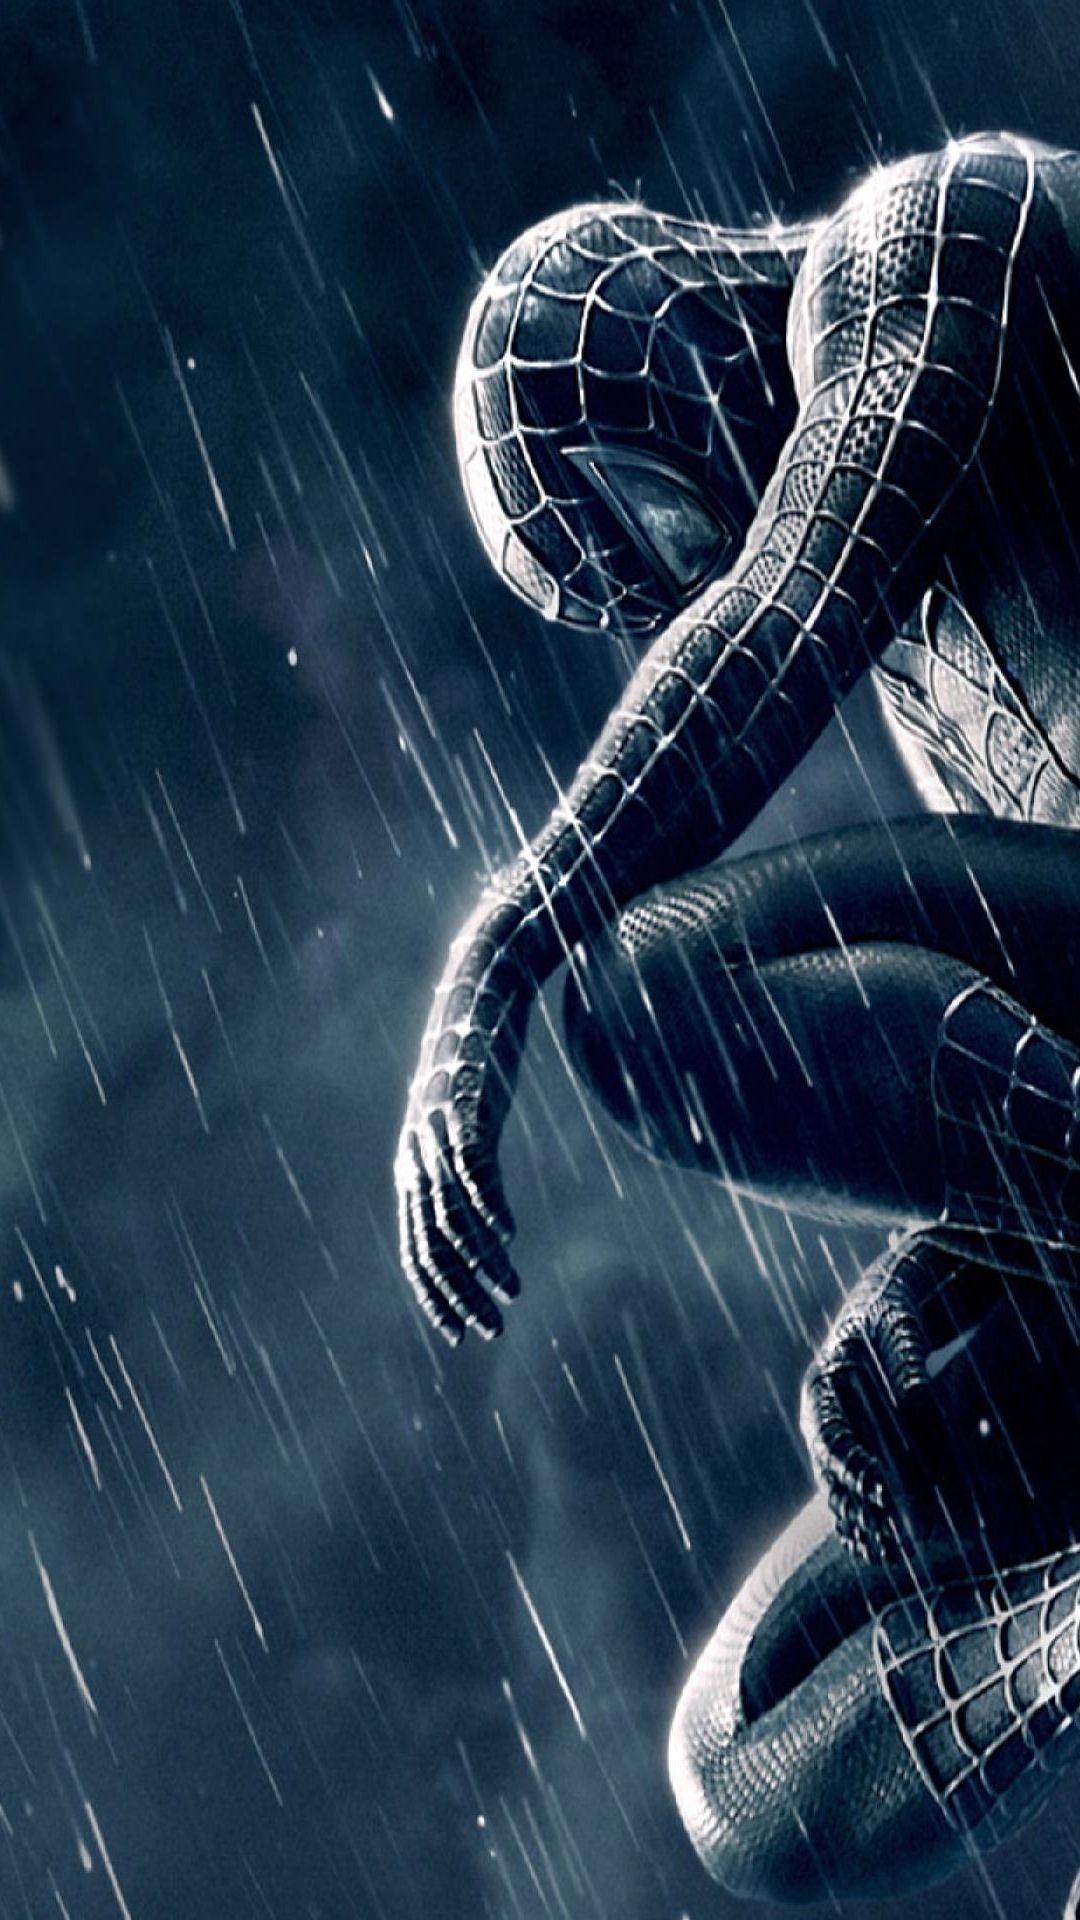 Spiderman 3, Black and blue wallpaper, Cinematic visuals, Amazing Spider-Man, 1080x1920 Full HD Phone